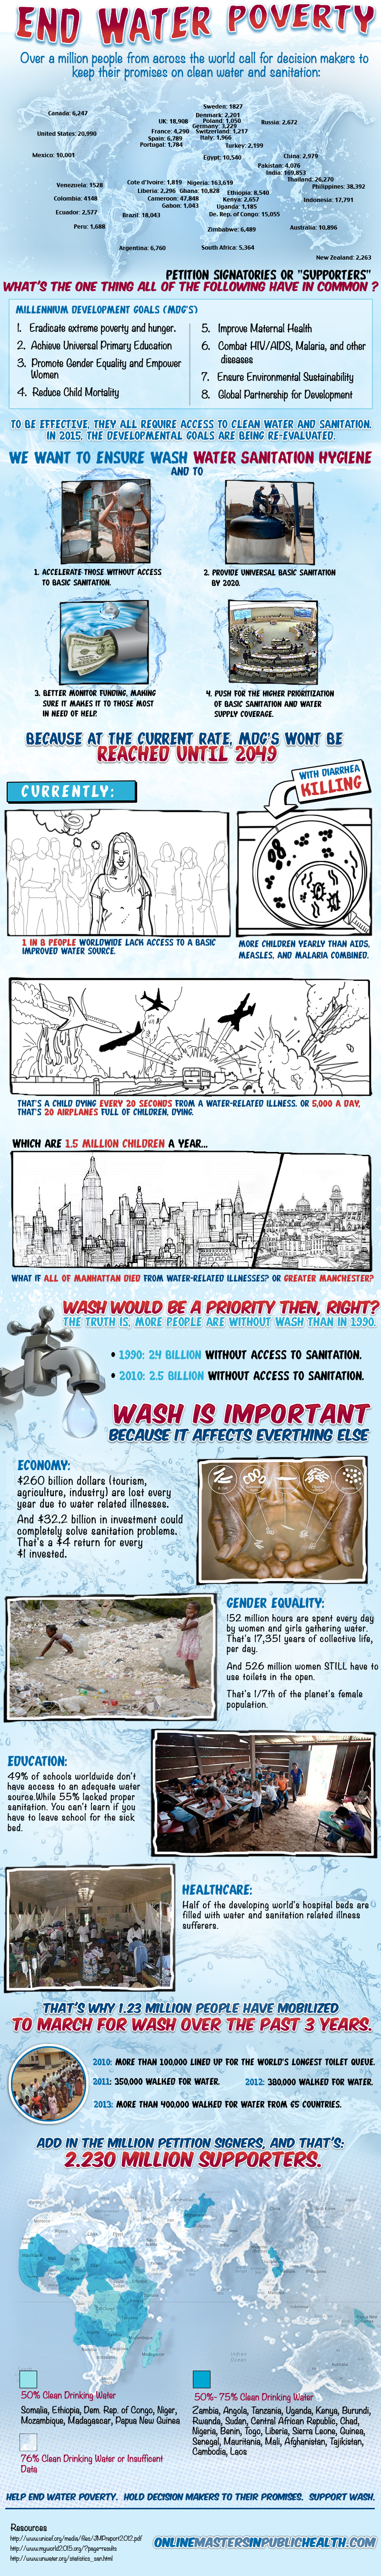 water poverty